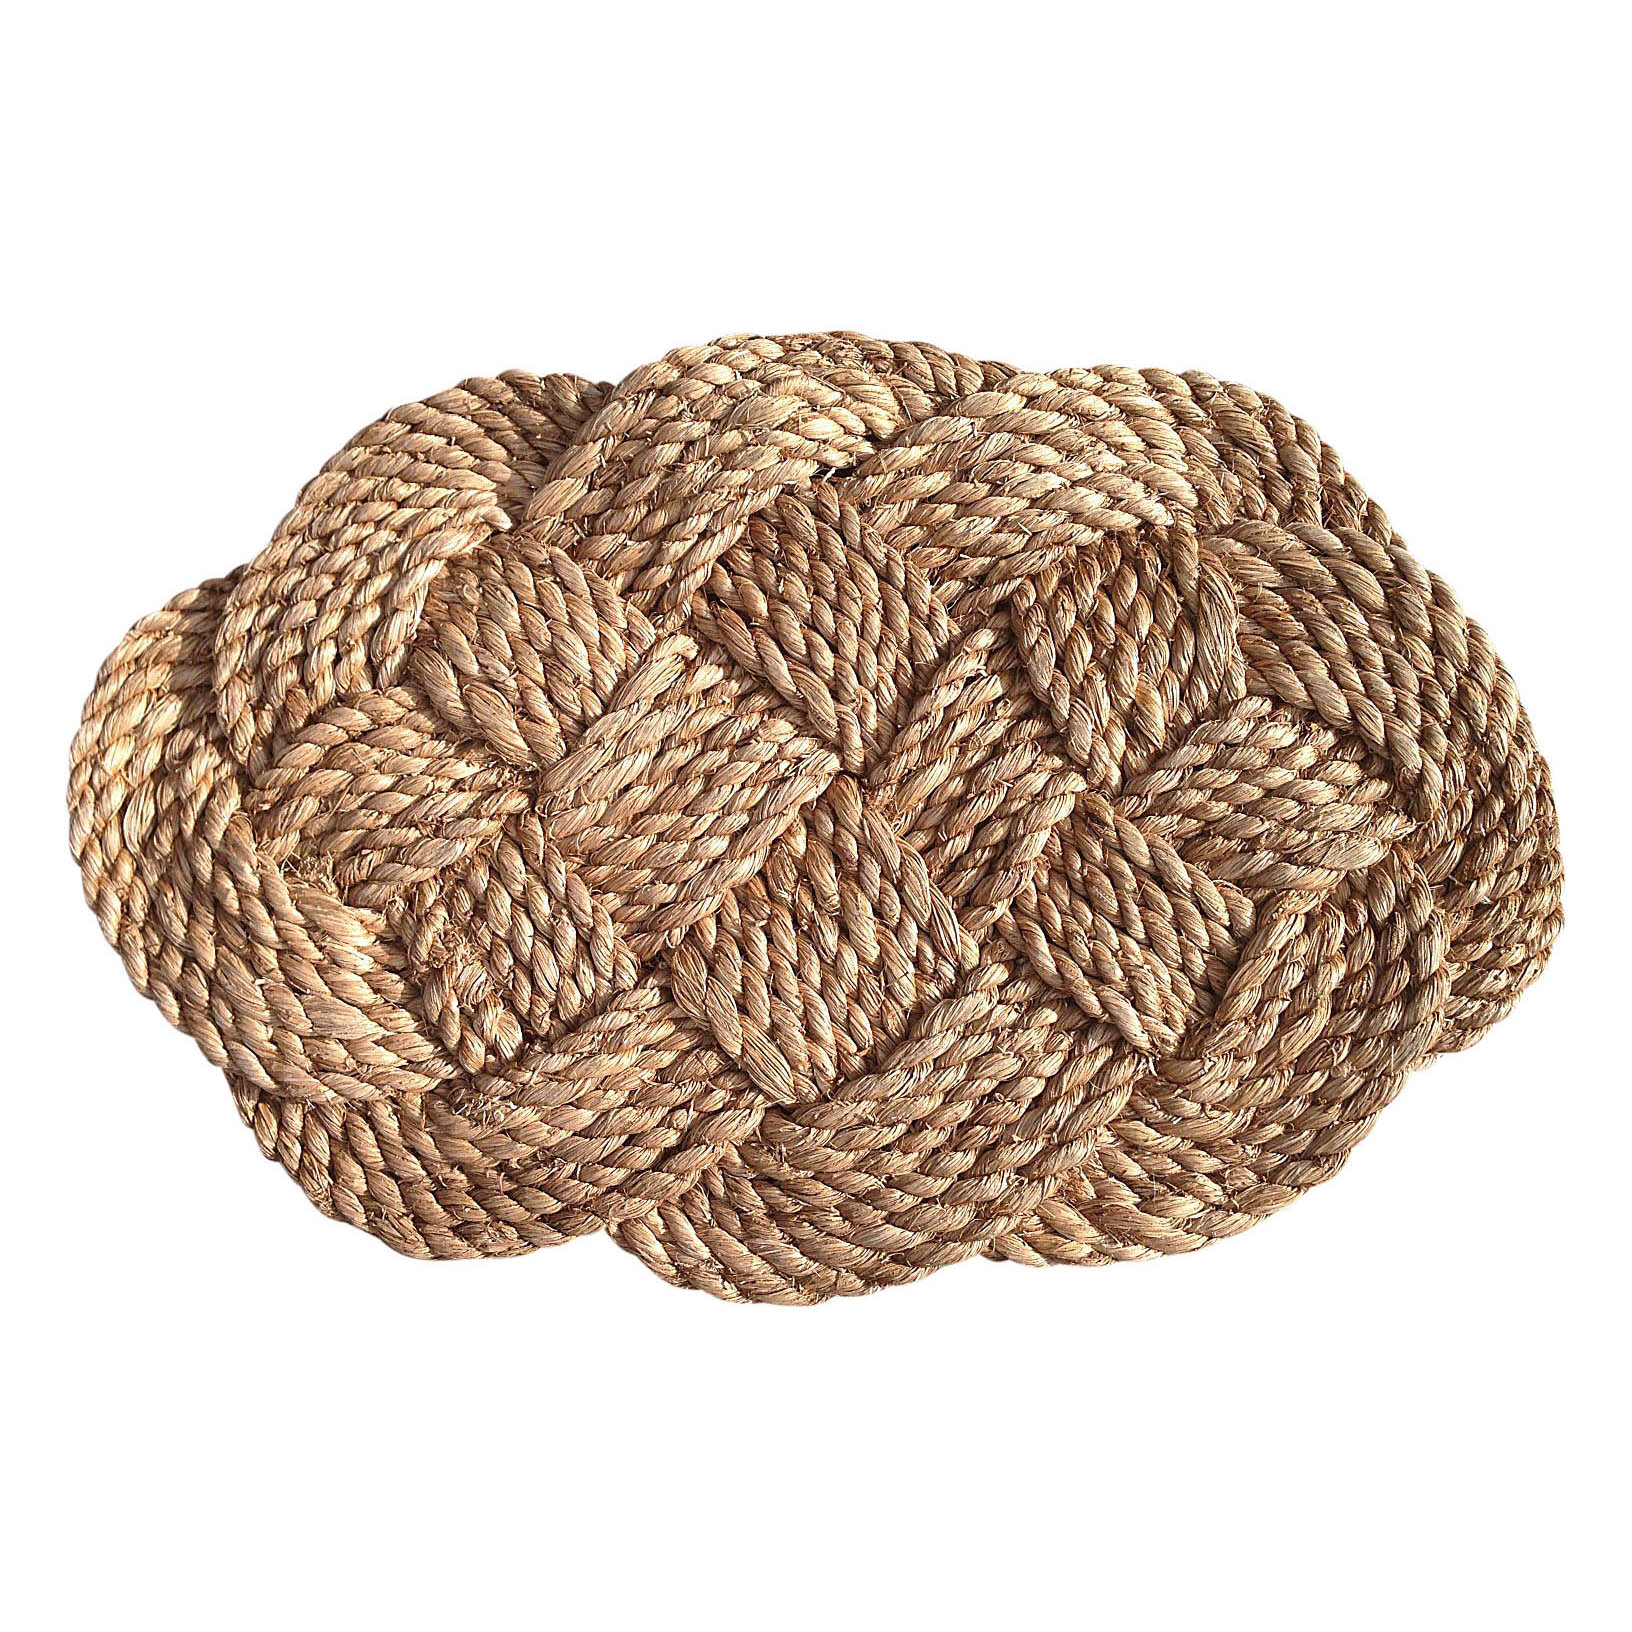 Oval Abaca Doormat (24" x 161/2") (Free Shipping)